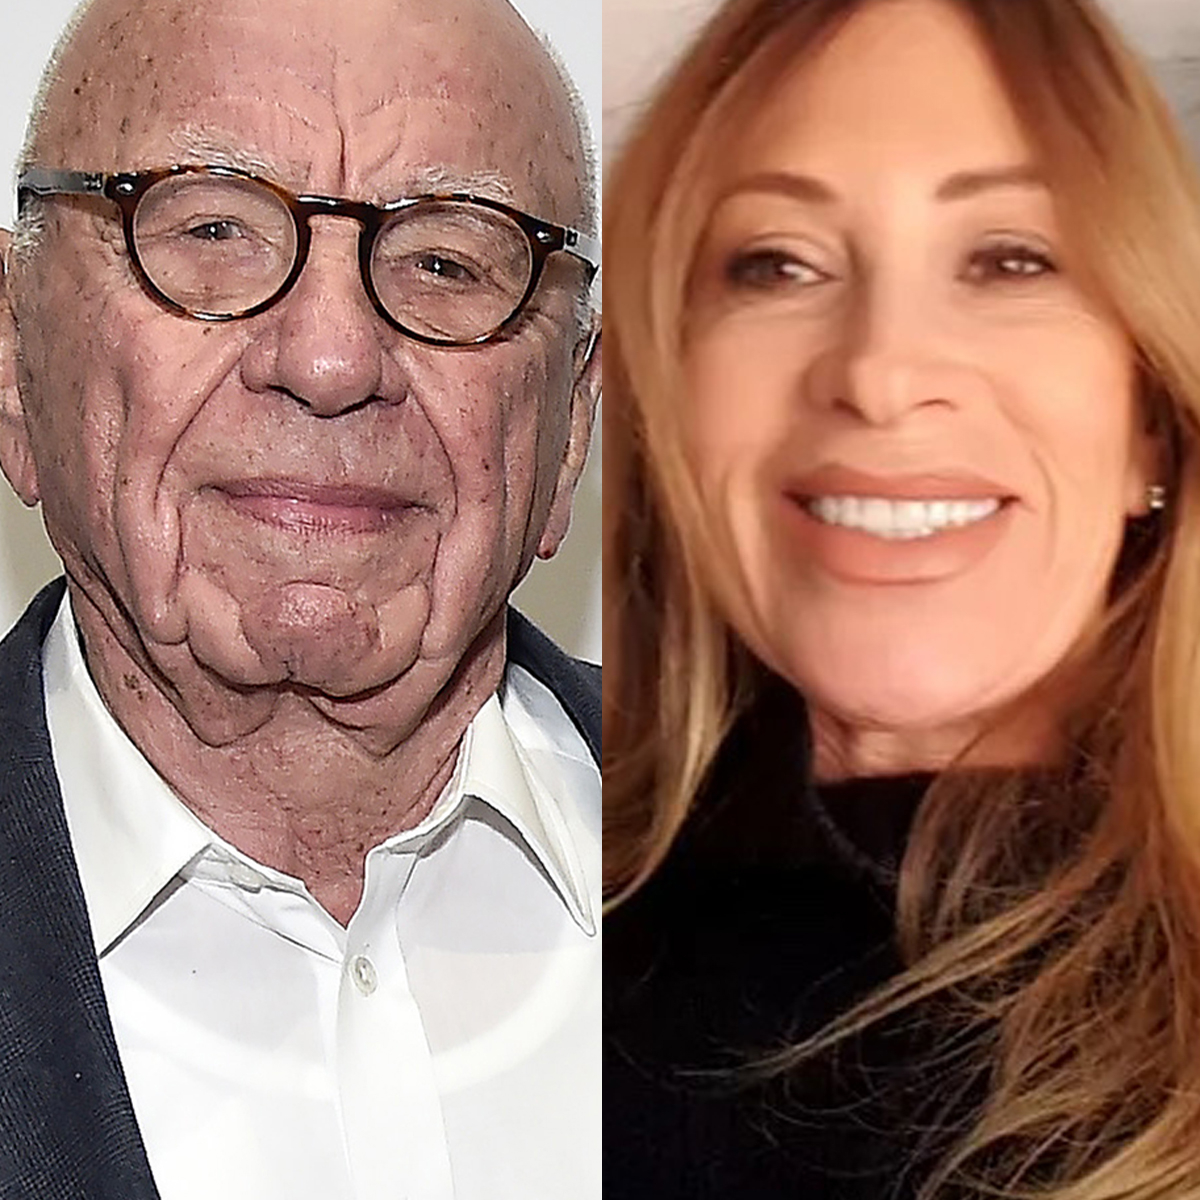 Rupert Murdoch Engaged to Ann Lesley Smith After Jerry Hall Breakup